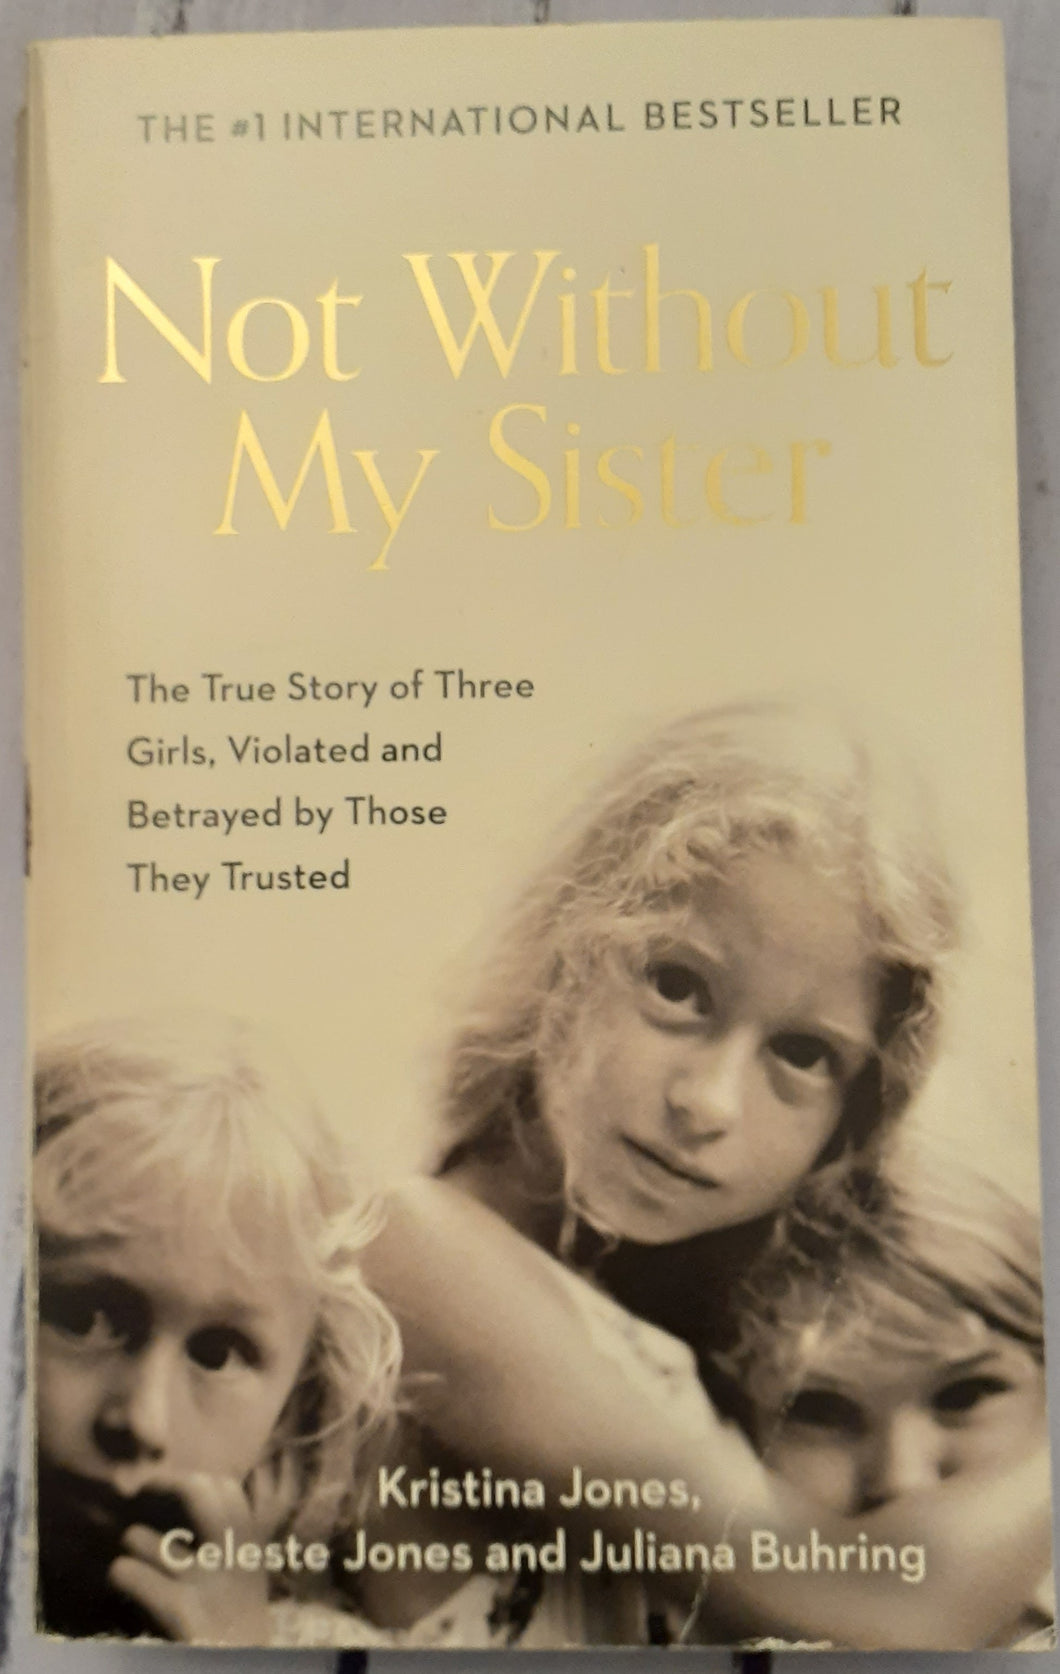 Not Without My Sister : The True Story of Three Girls Violated and Betrayed by Those They Trusted